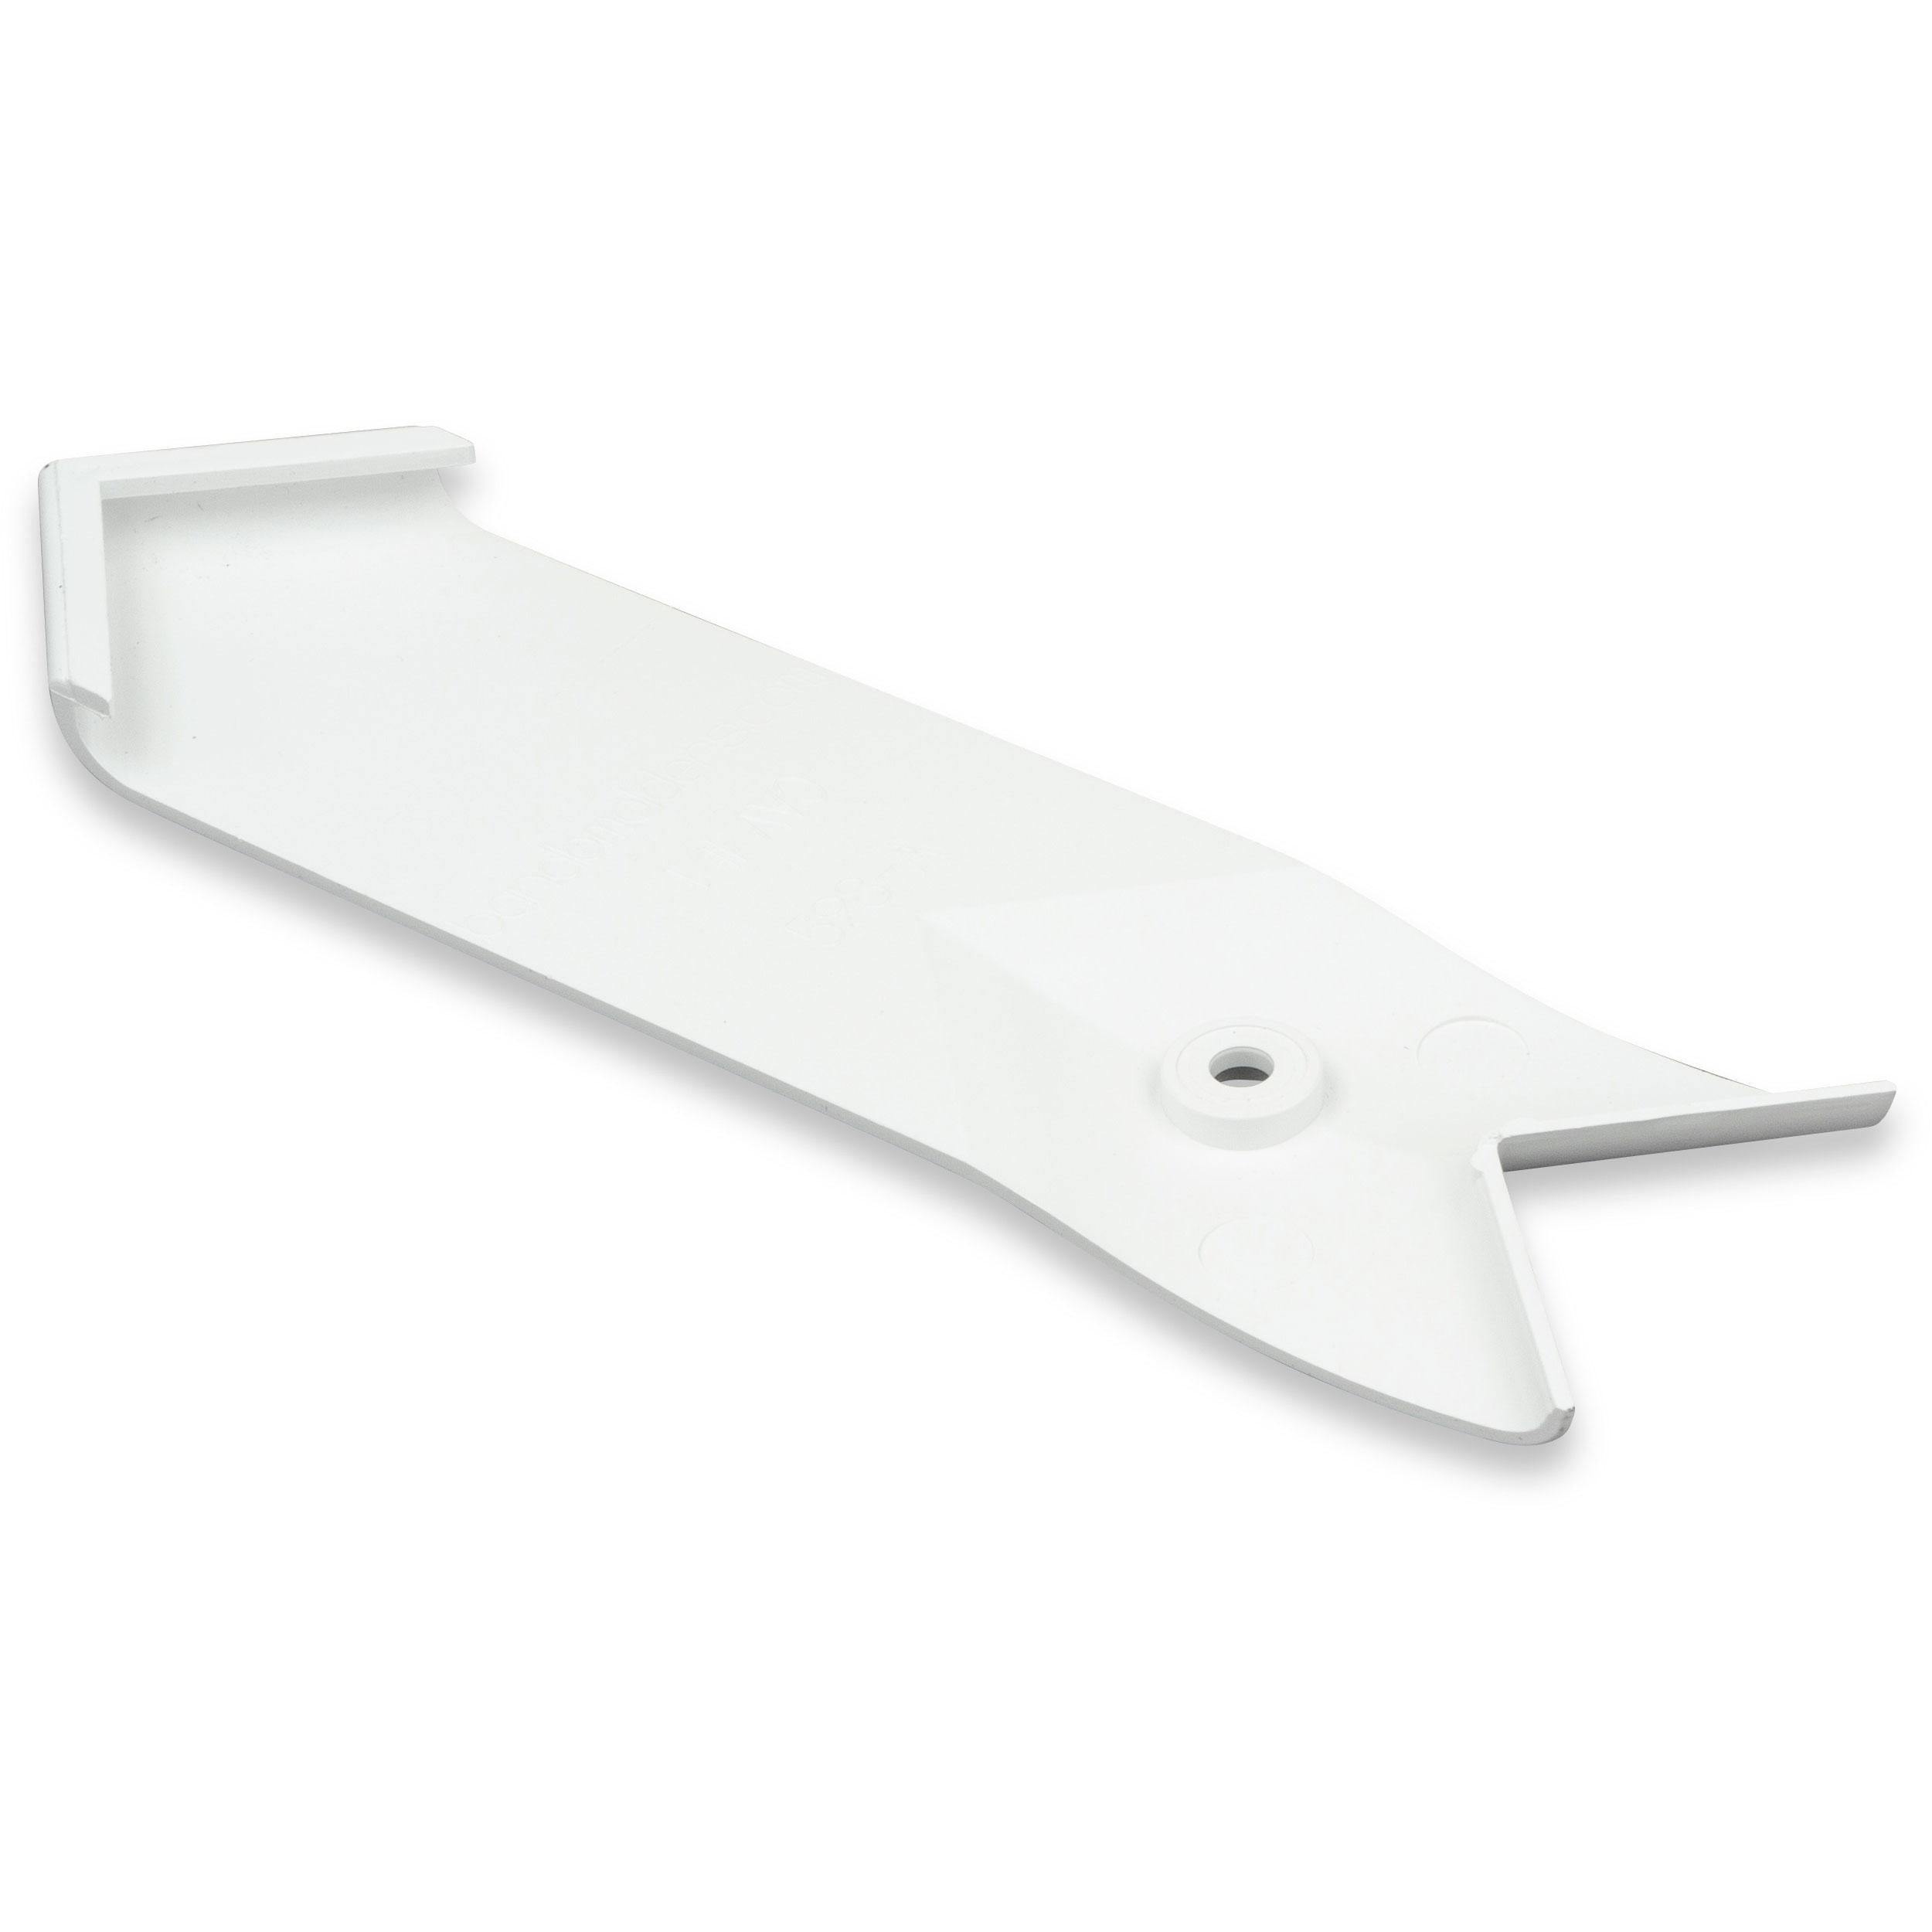 865-94290 Straight Corner Slide-Out Extrusion Cover, Polar White